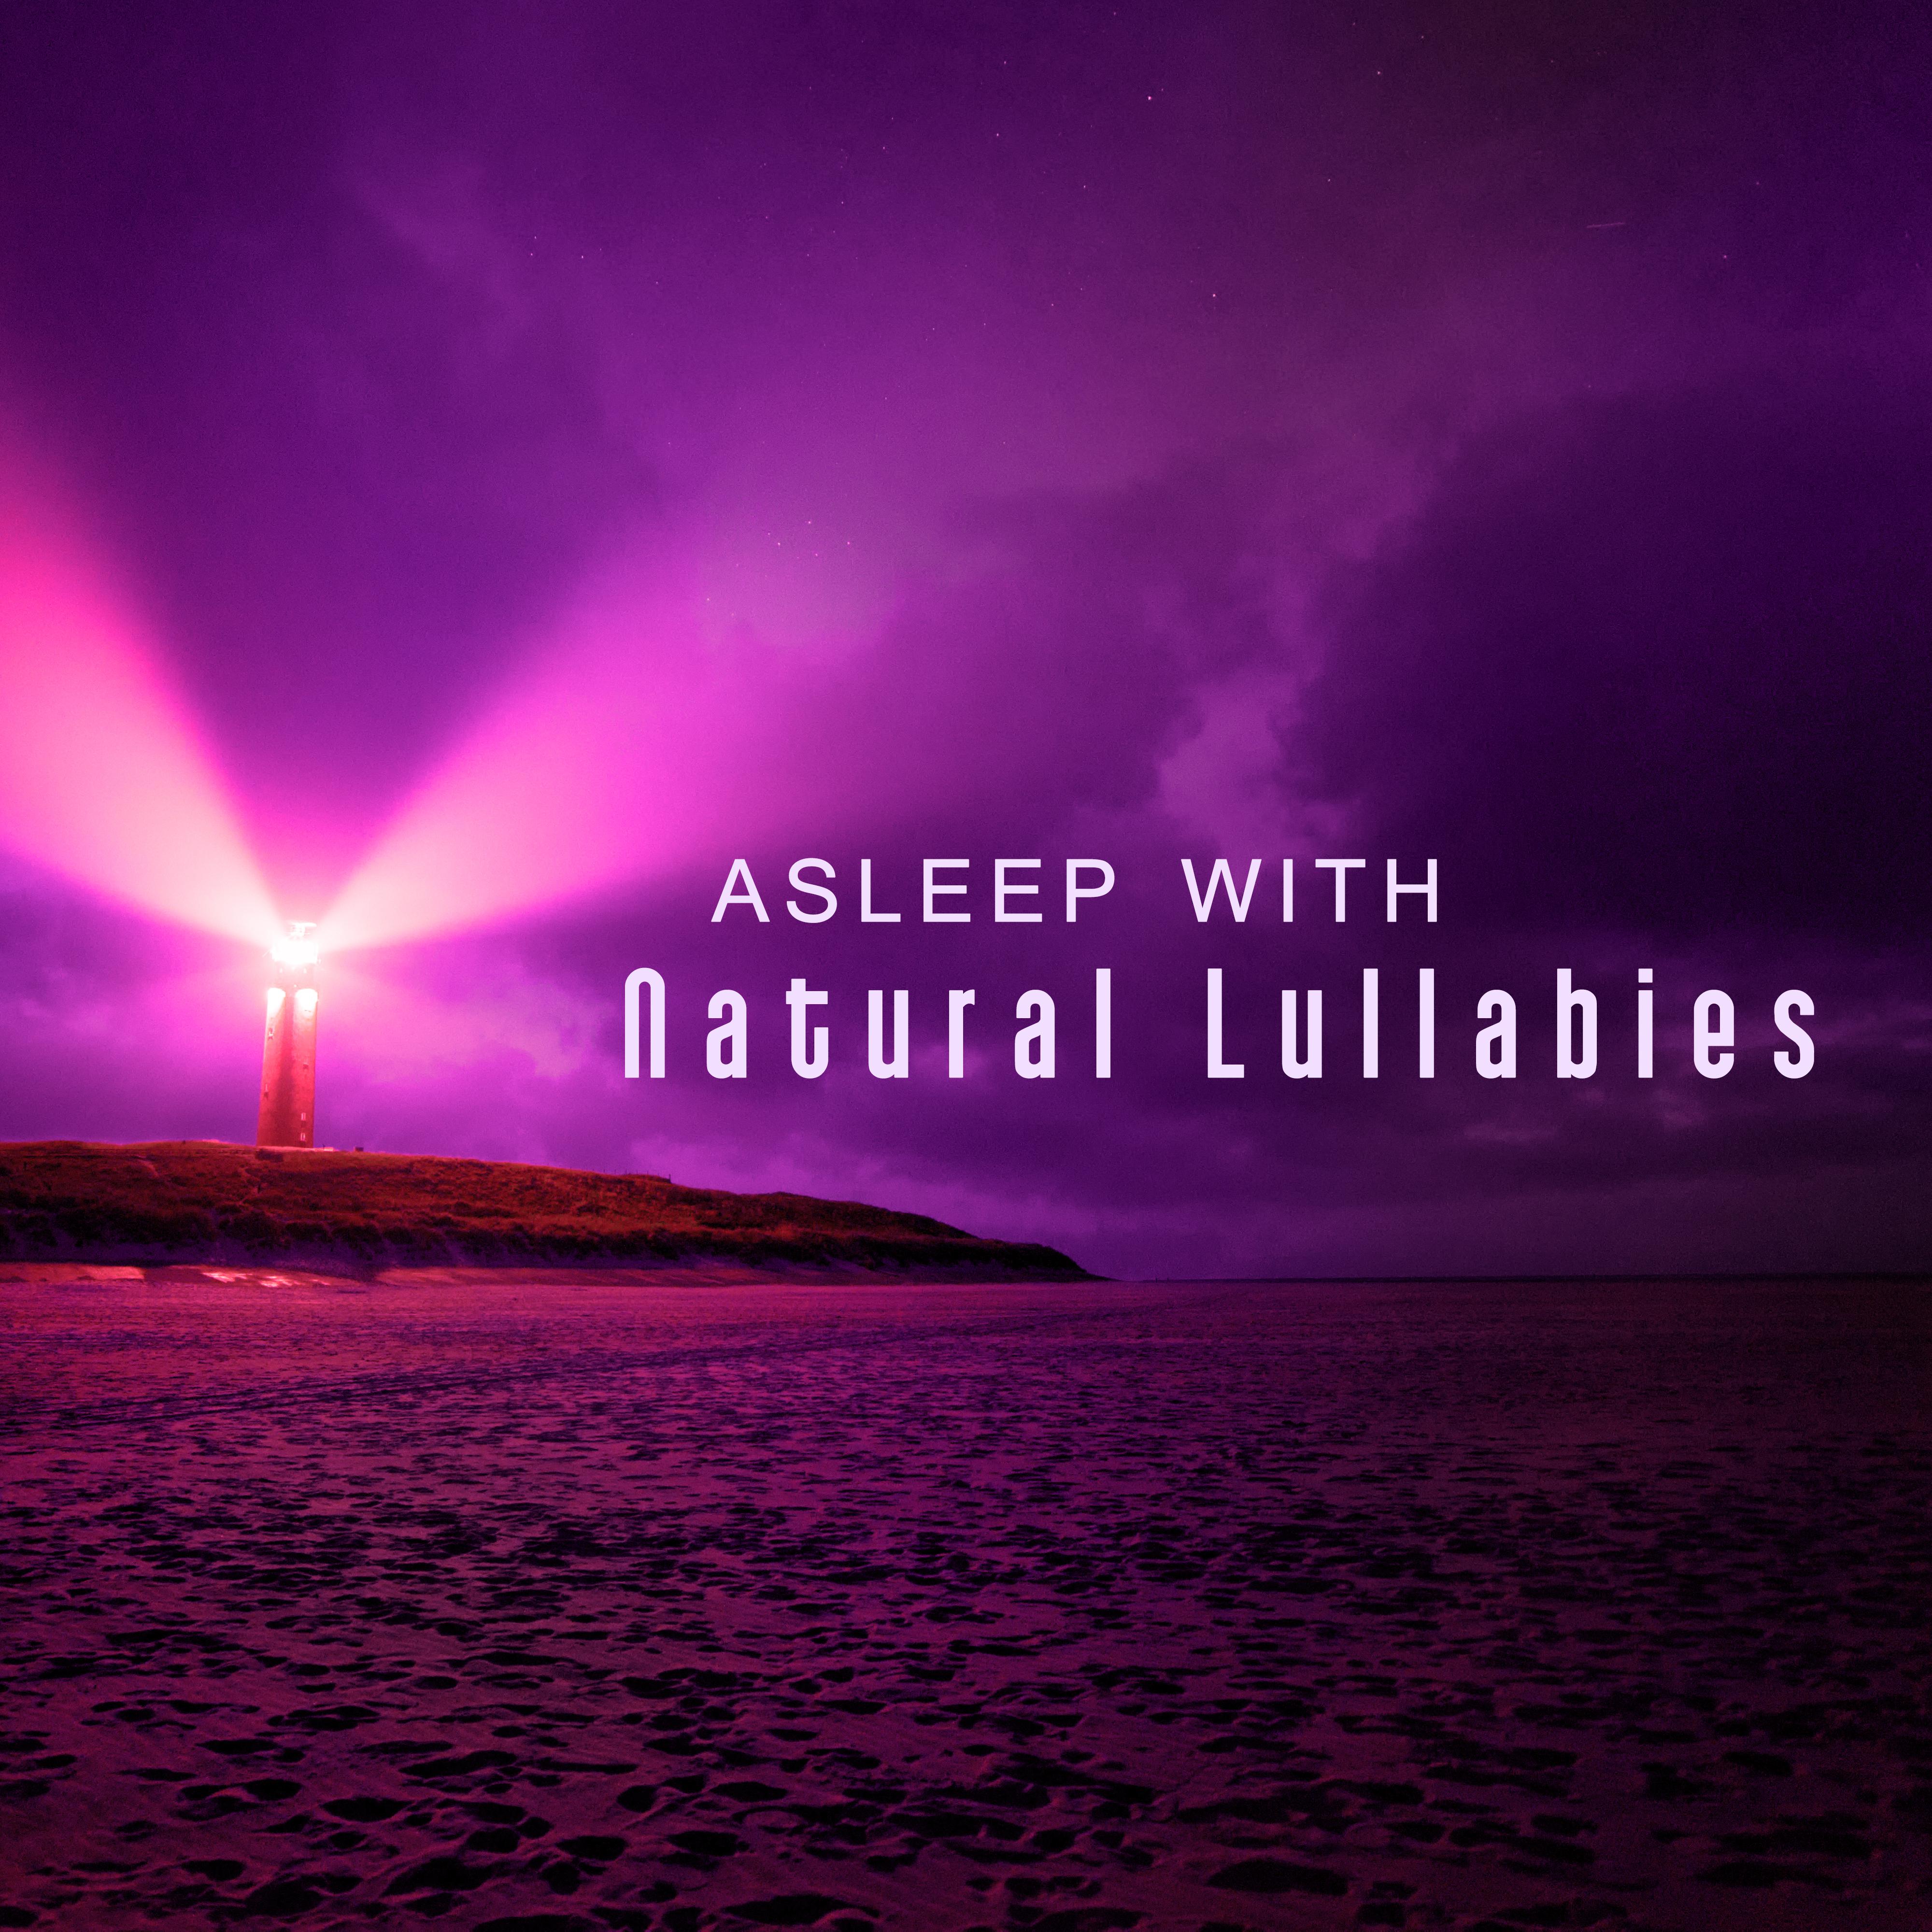 Asleep with Natural Lullabies – Sounds of Nature, Calm Down, Sleep, New Age for Sleep, Deep Sleep, Relax, Natural White Noise